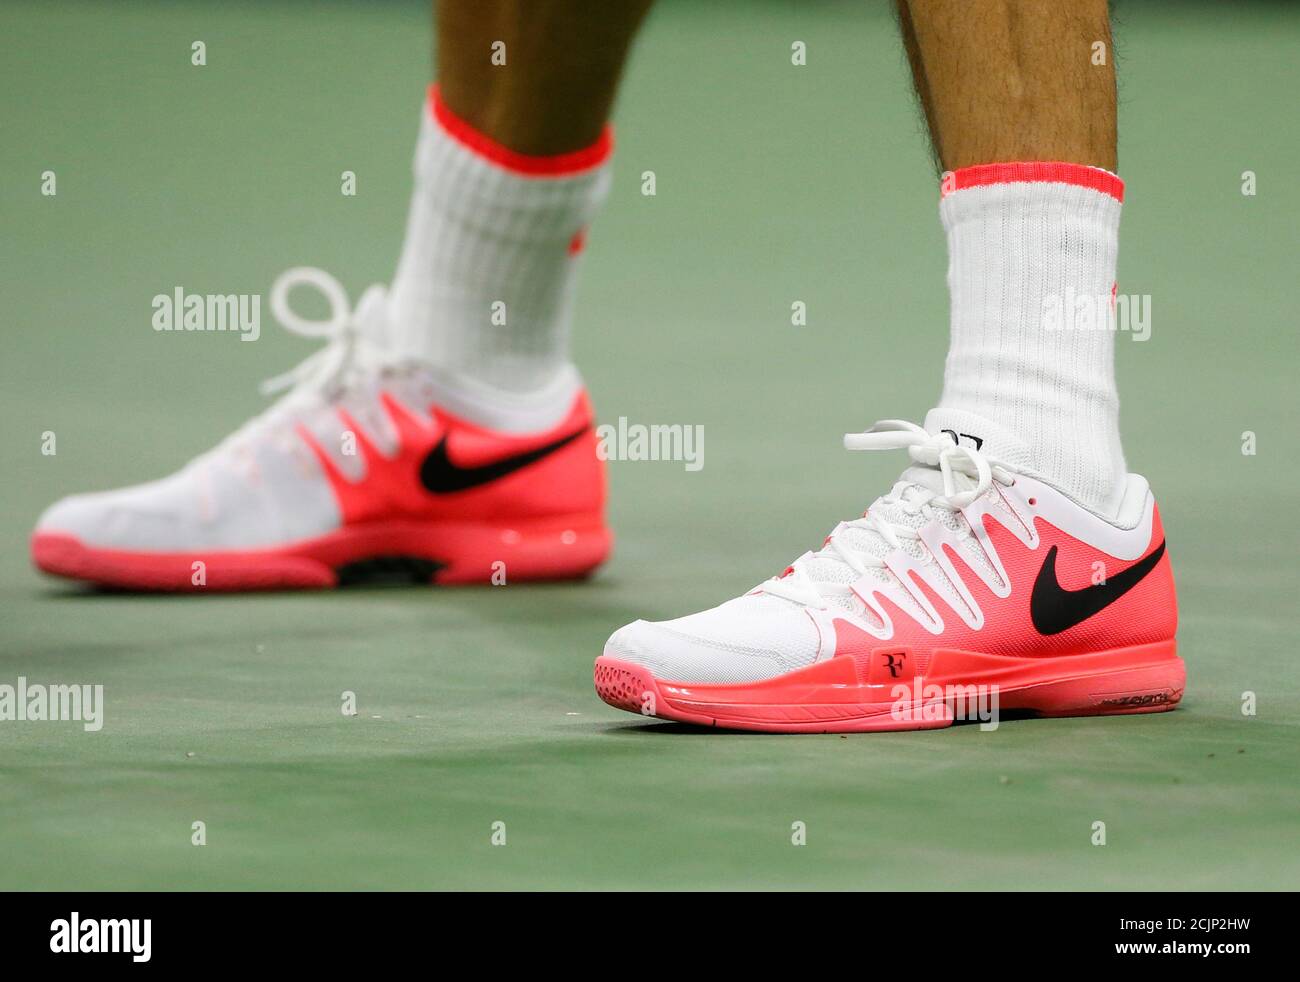 Roger Federer of Switzerland wears his signature shoe from Nike as he plays  compatriot Stan Wawrinka during their men's singles semi-final match at the  U.S. Open Championships tennis tournament in New York,